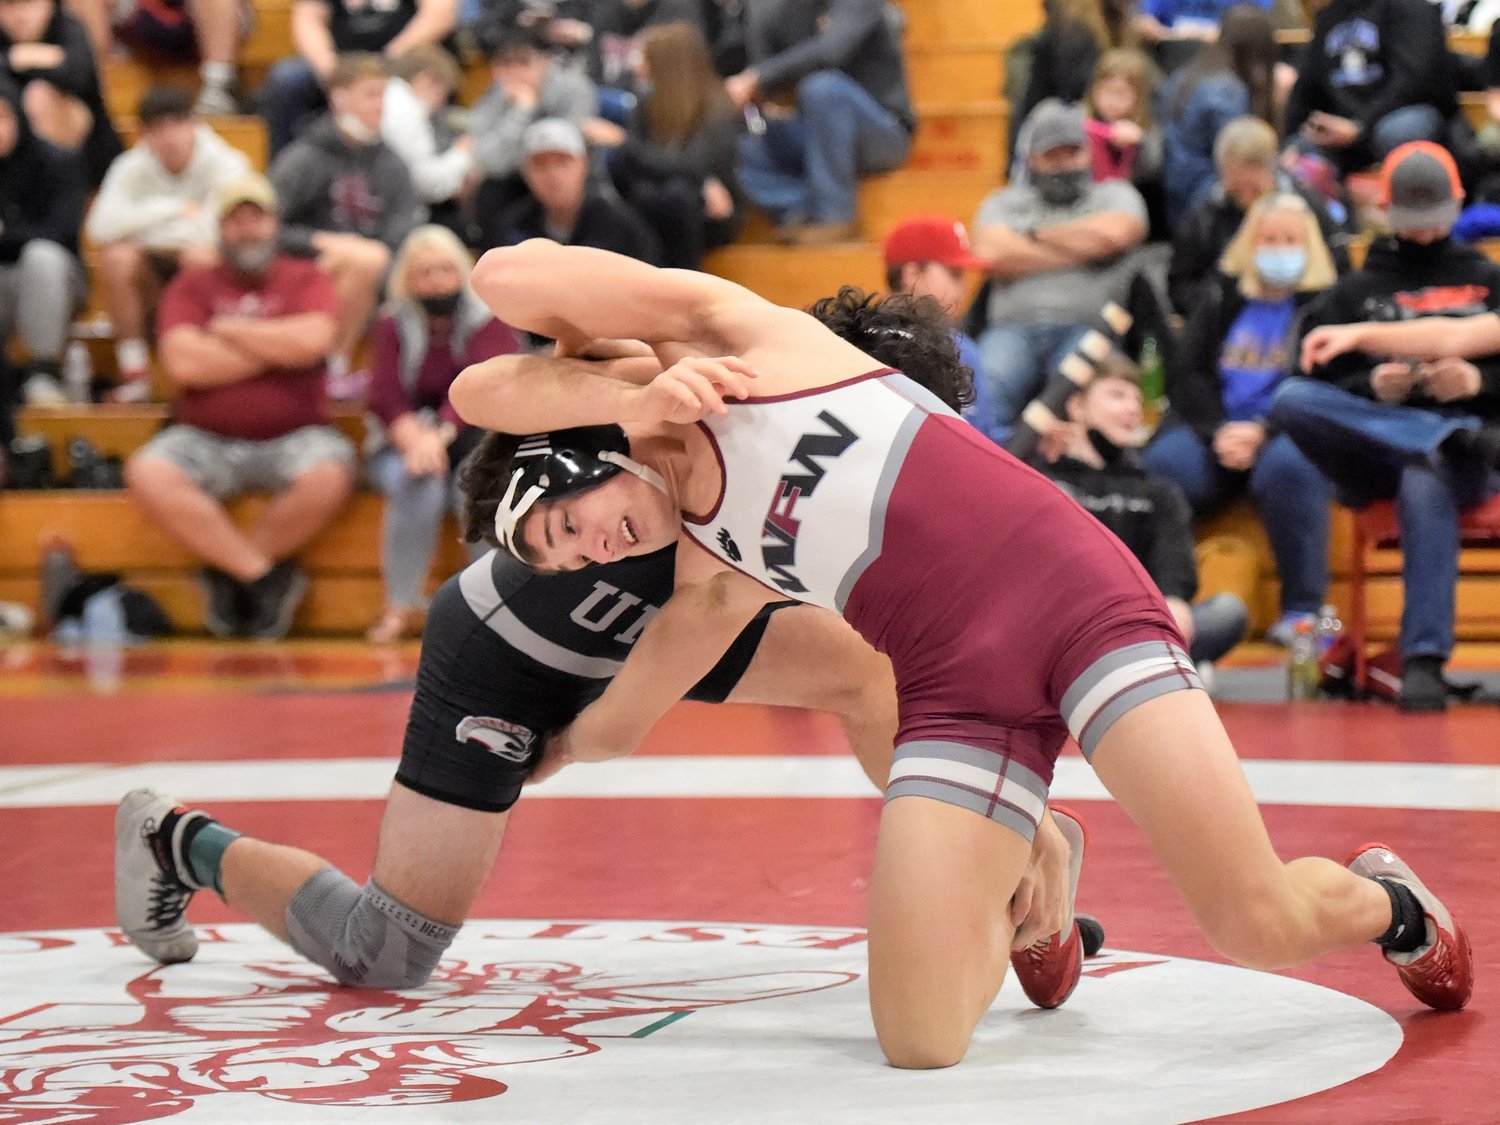 W.F. West’s Ty Foister flips positions with a Union wrestler on Saturday, Jan. 8, at Castle Rock High School.